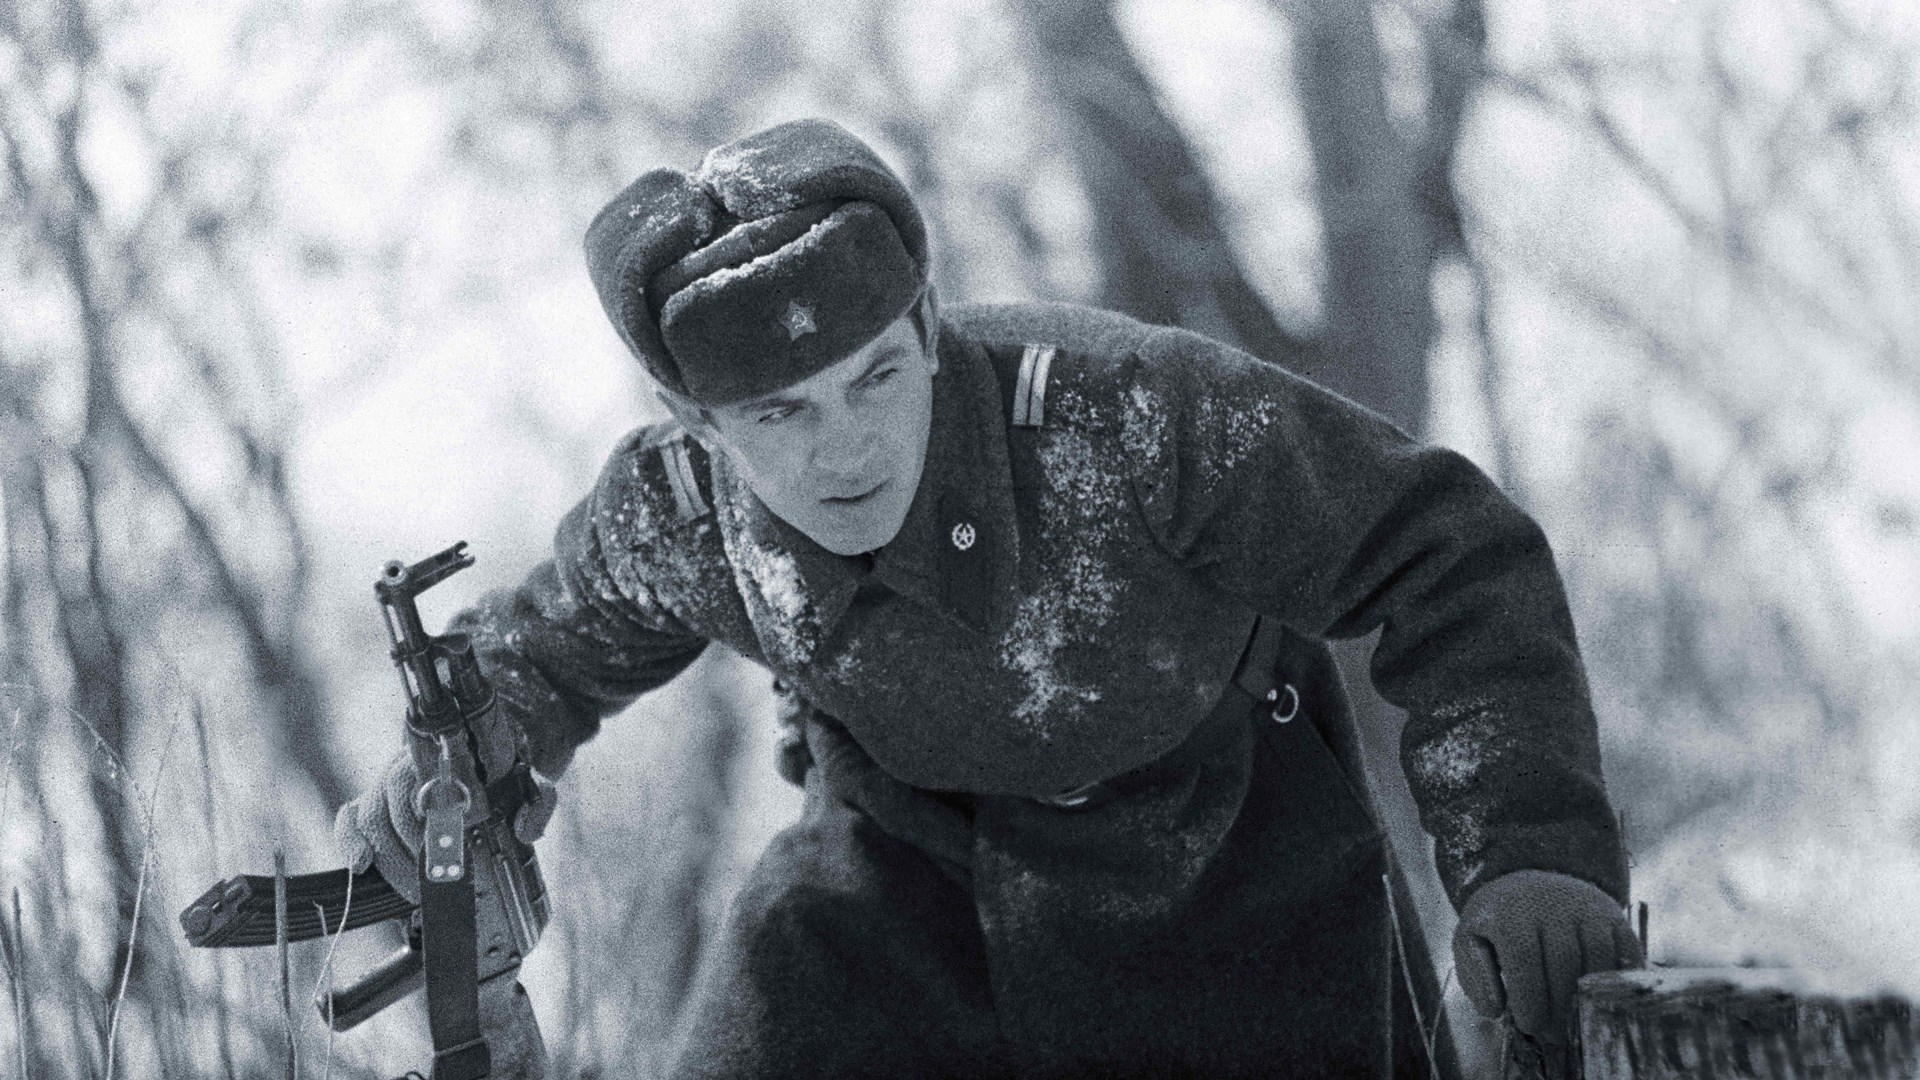 Hero of the Soviet Union Junior Sergeant Yuri Babansky who distinguished himself during the Sino-Soviet border conflict of 1969. He is seen here armed with an AKM. Courtesy of Tom Laemlein